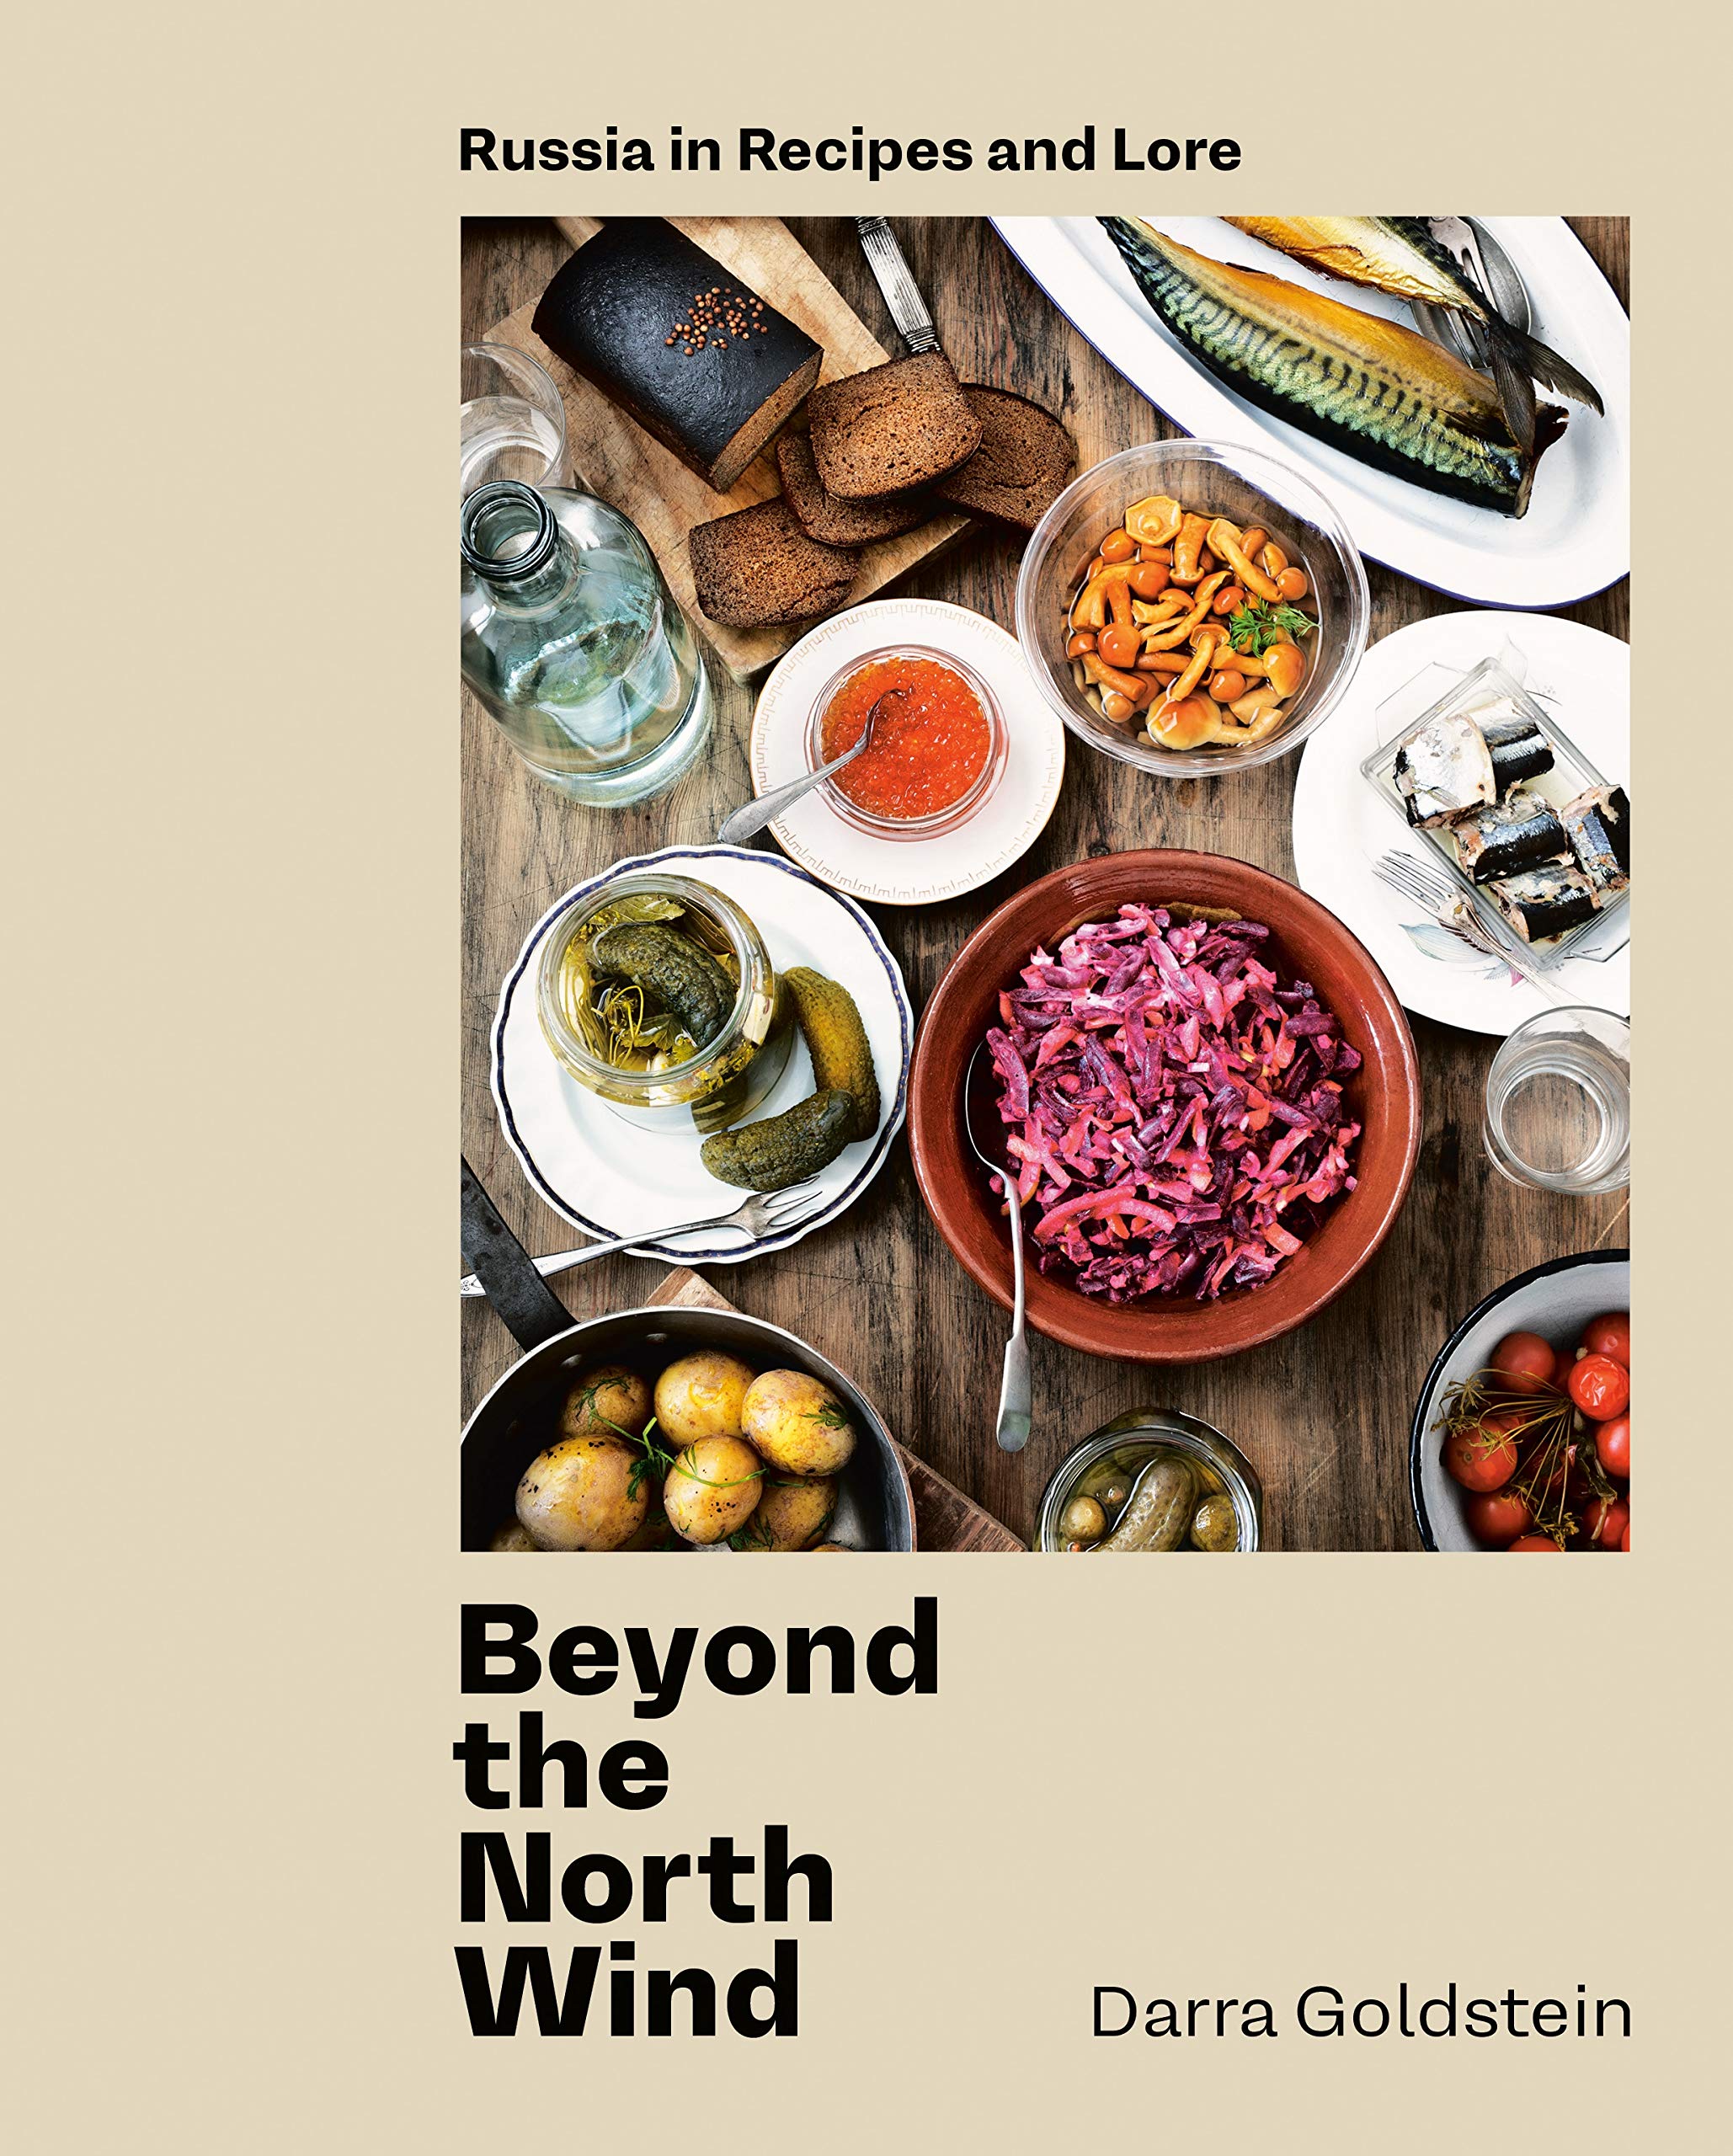 Beyond the North Wind: Russia in Recipes and Lore (Darra Goldstein)